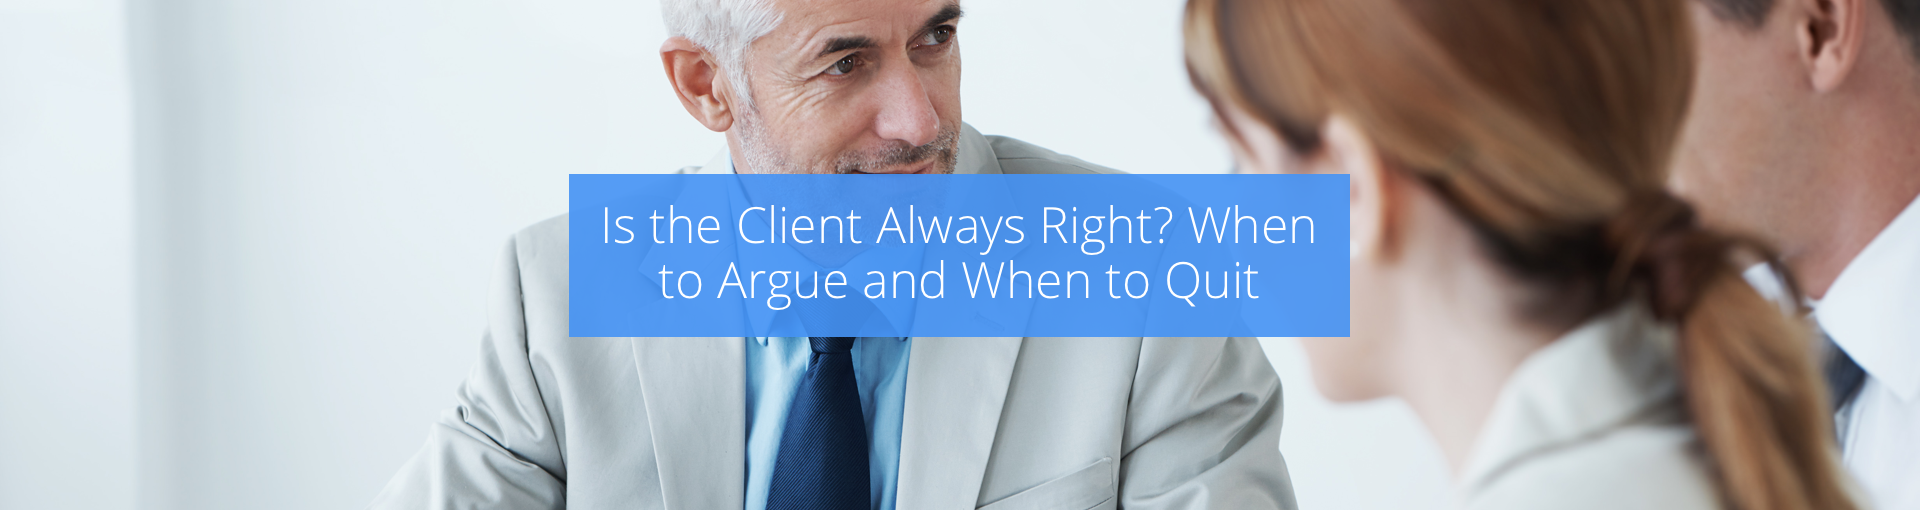 Is the Client Always Right? When to Argue and When to Quit Featured Image